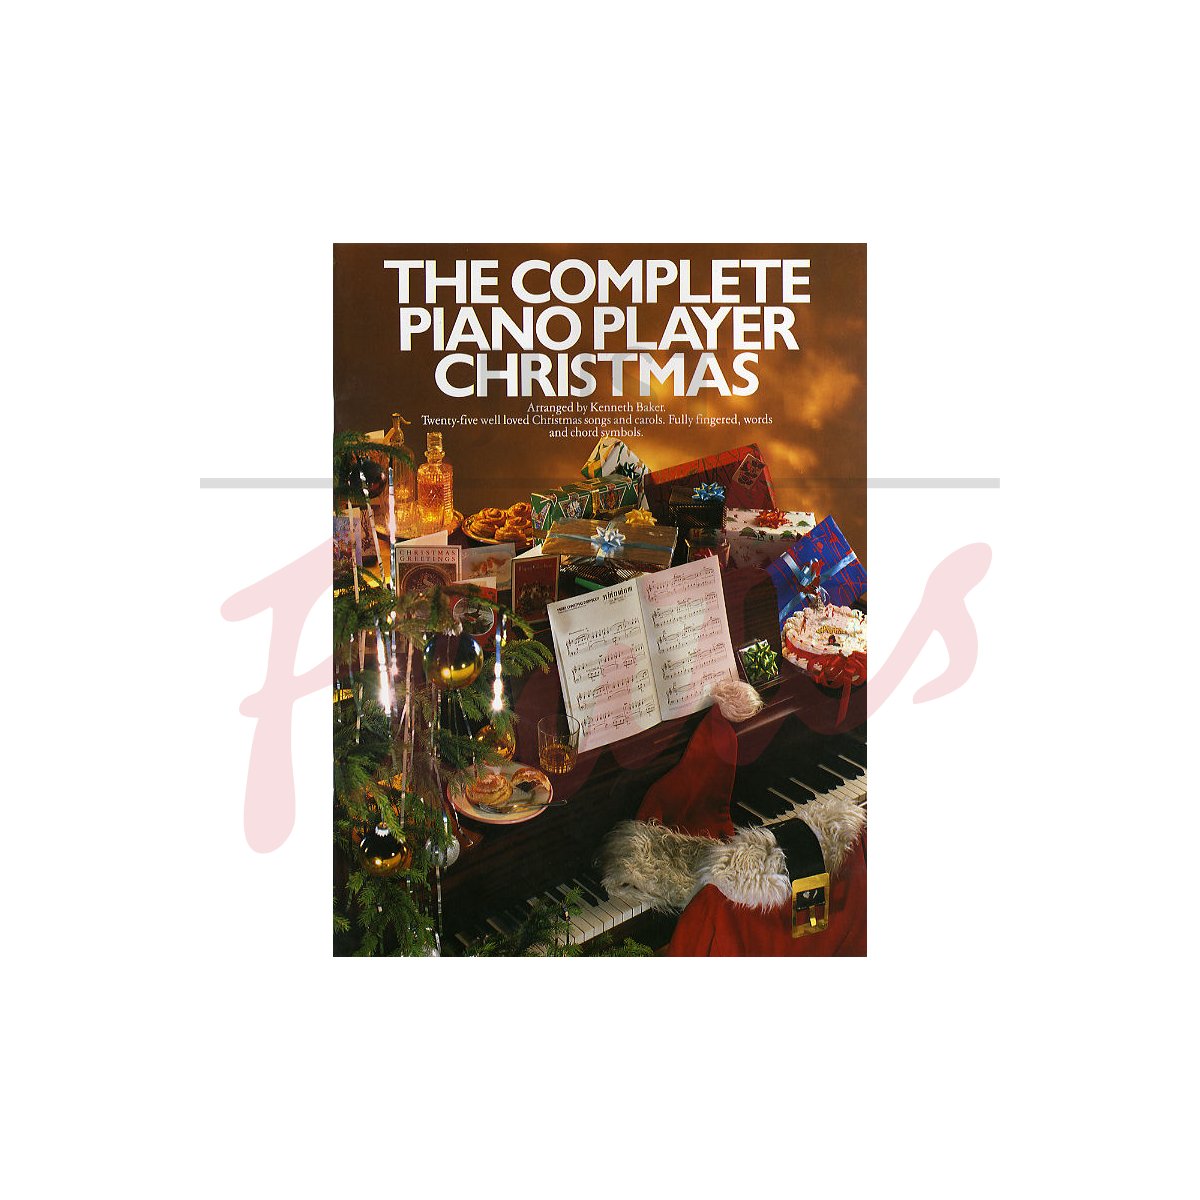 The Complete Piano Player Christmas